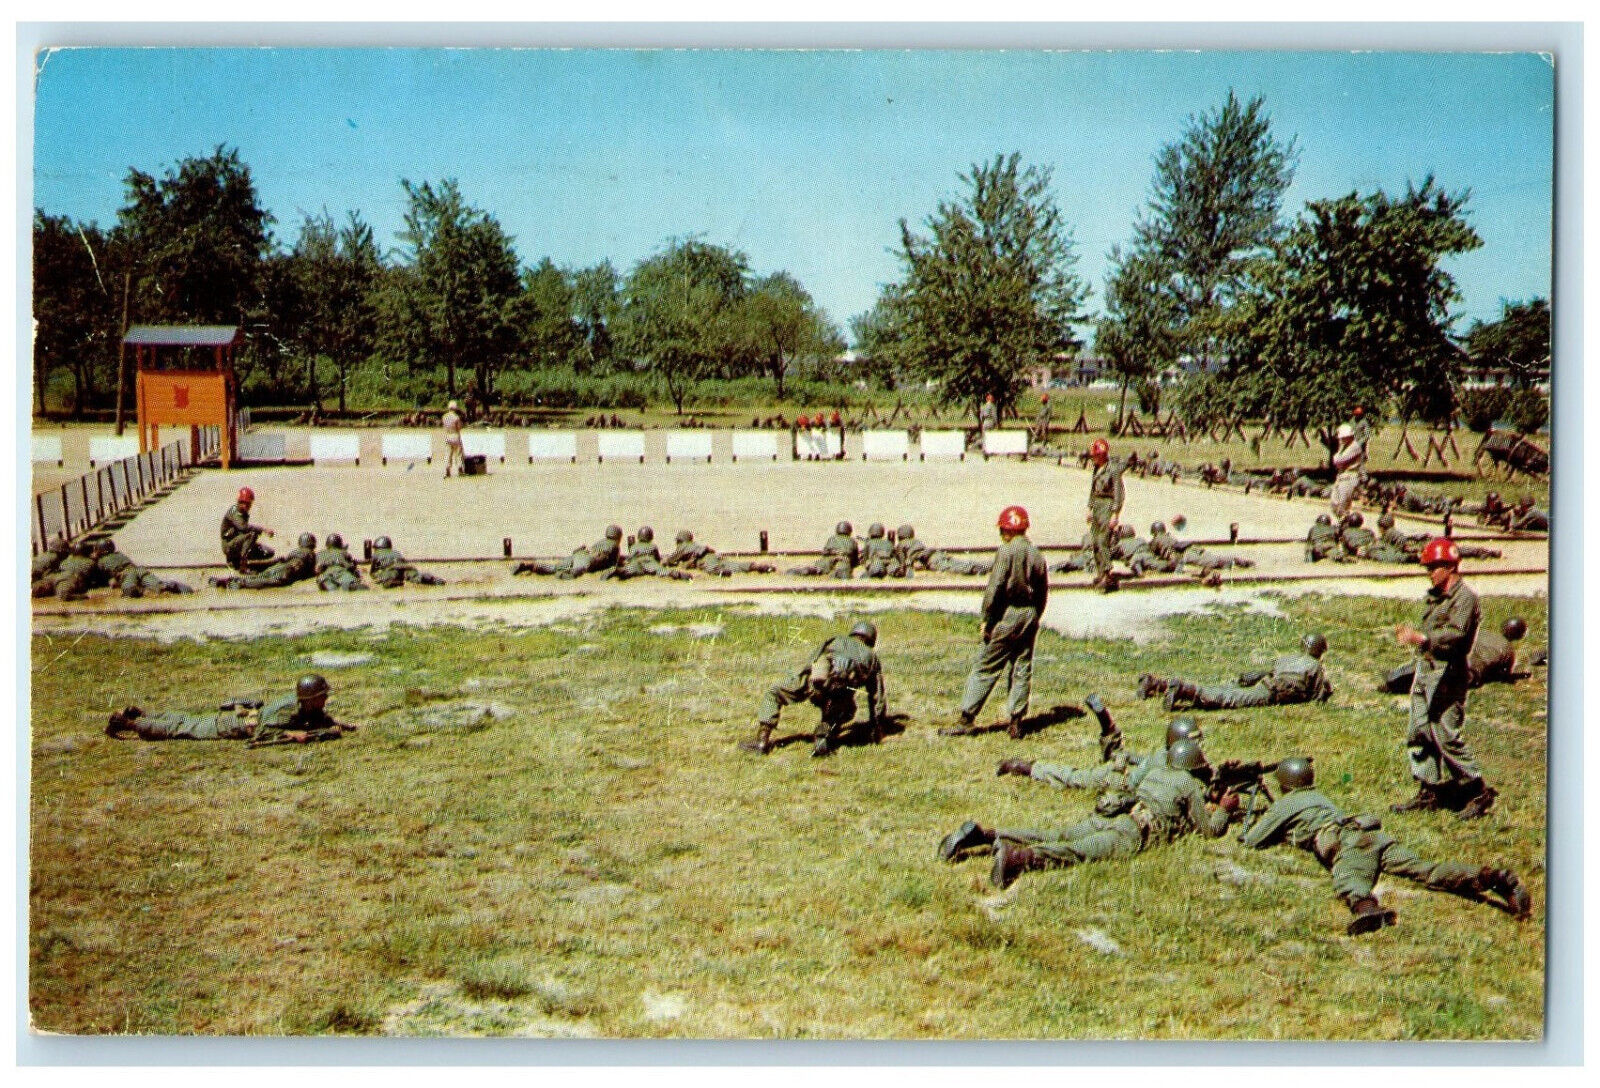 1961 Training Court Located in Training Area with Weapons Fort Dix NJ Postcard